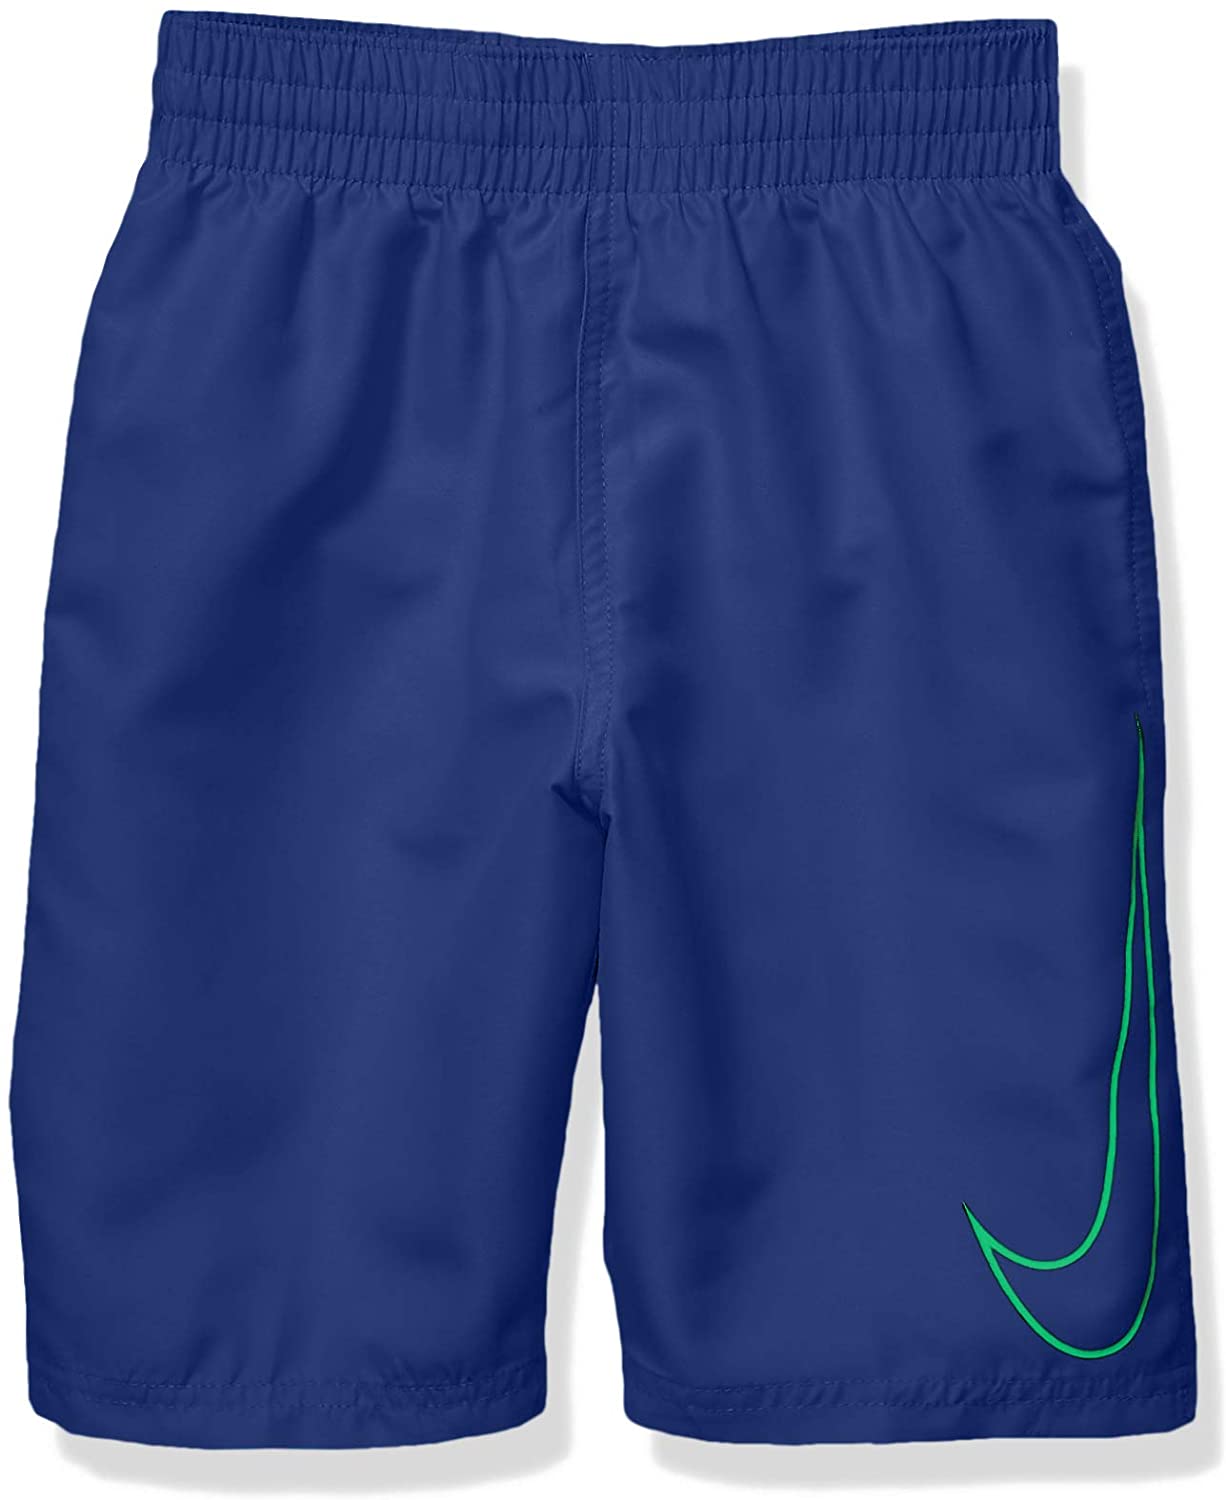 Boy's Nike Big Swoosh Solid Lap Volley Short Swim Trunk in Game Royal color from the front